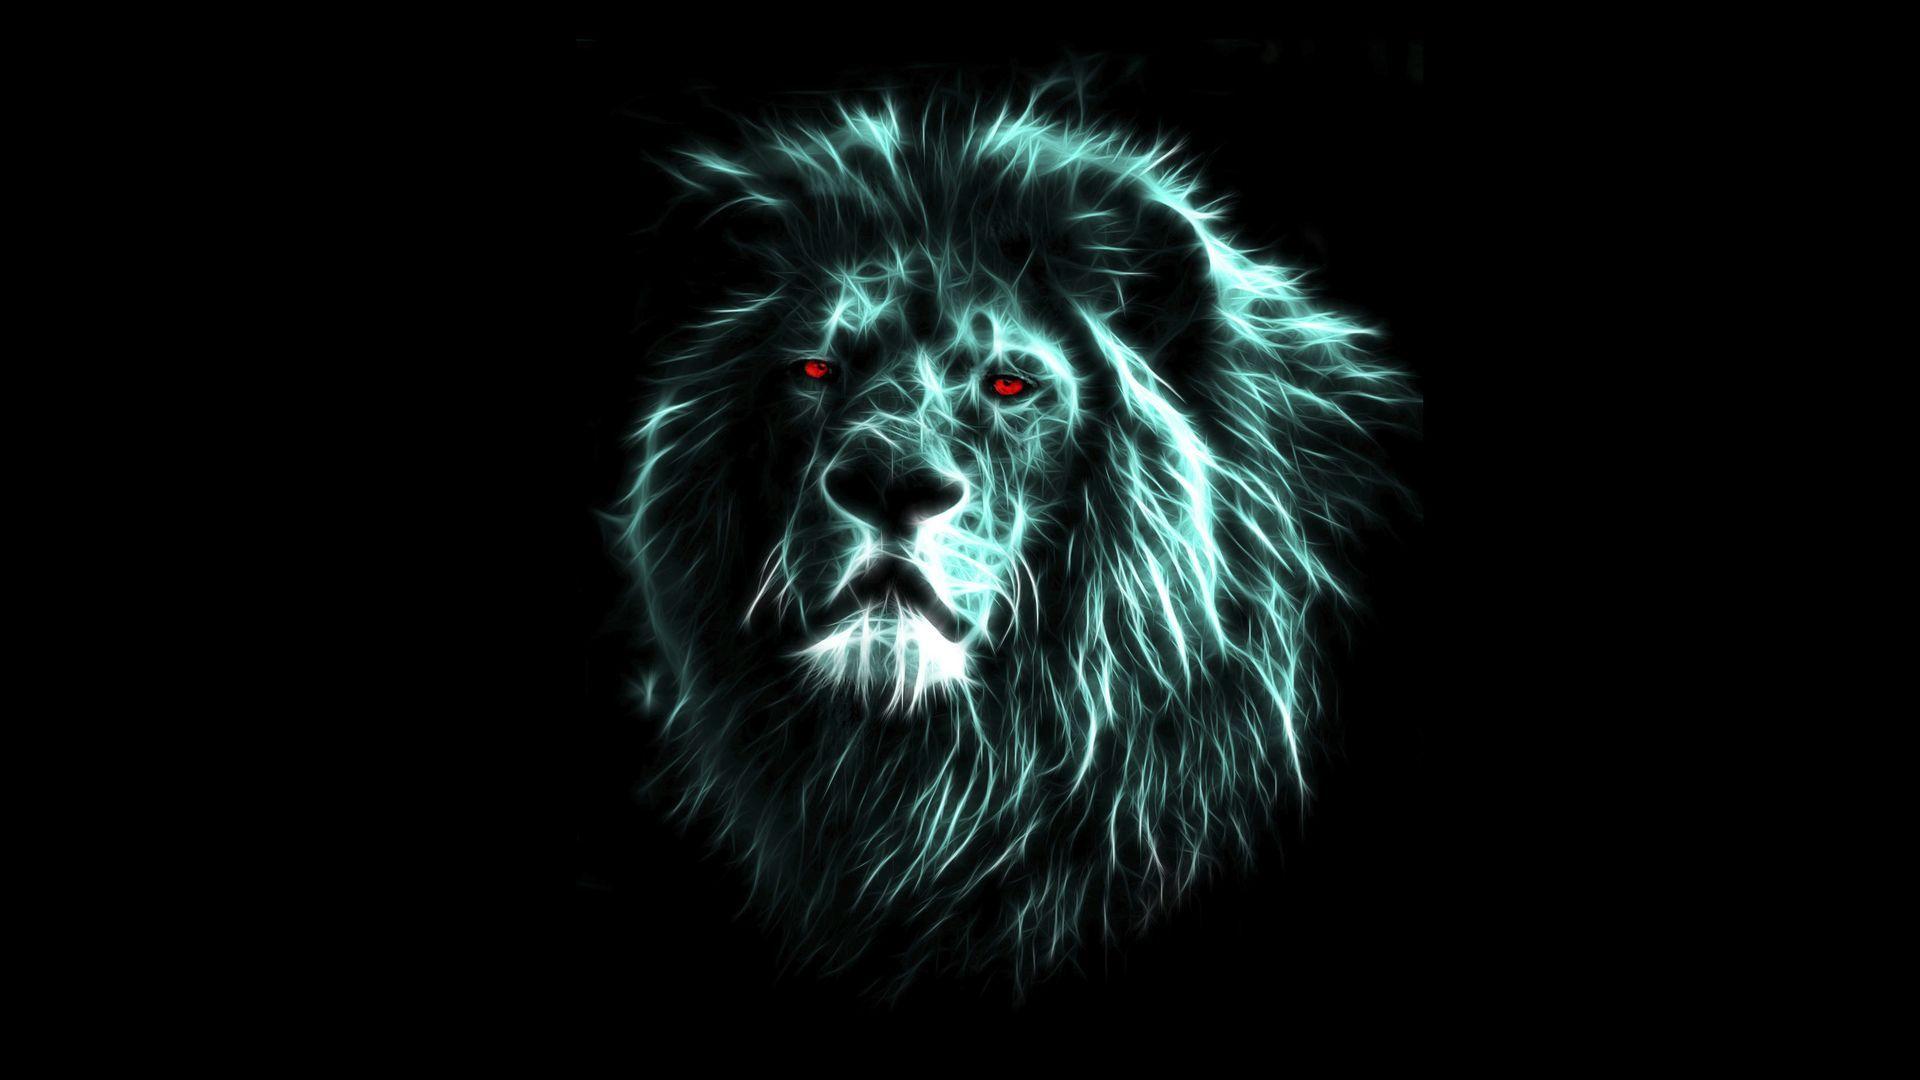 Lion Wallpaper HD Android Apps on Google Play. HD Wallpaper